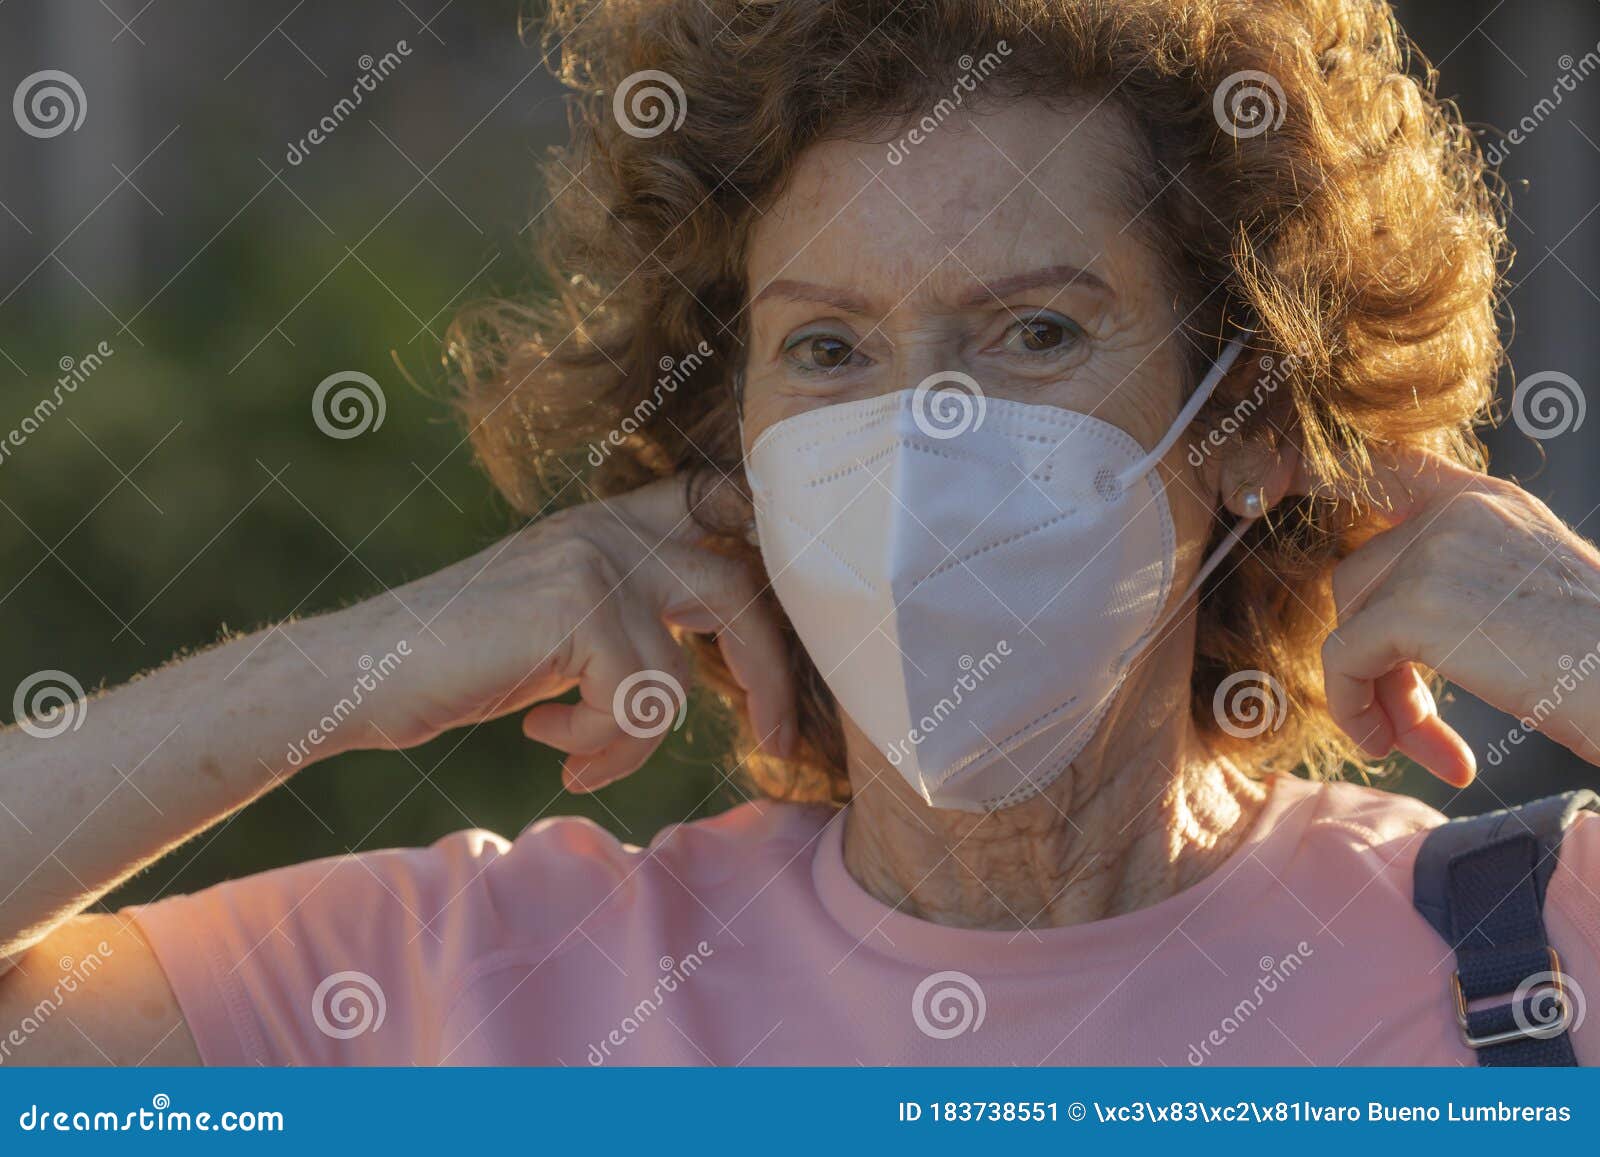 a real woman shows how to put on the protective mask to prevent the spread of the covid-19